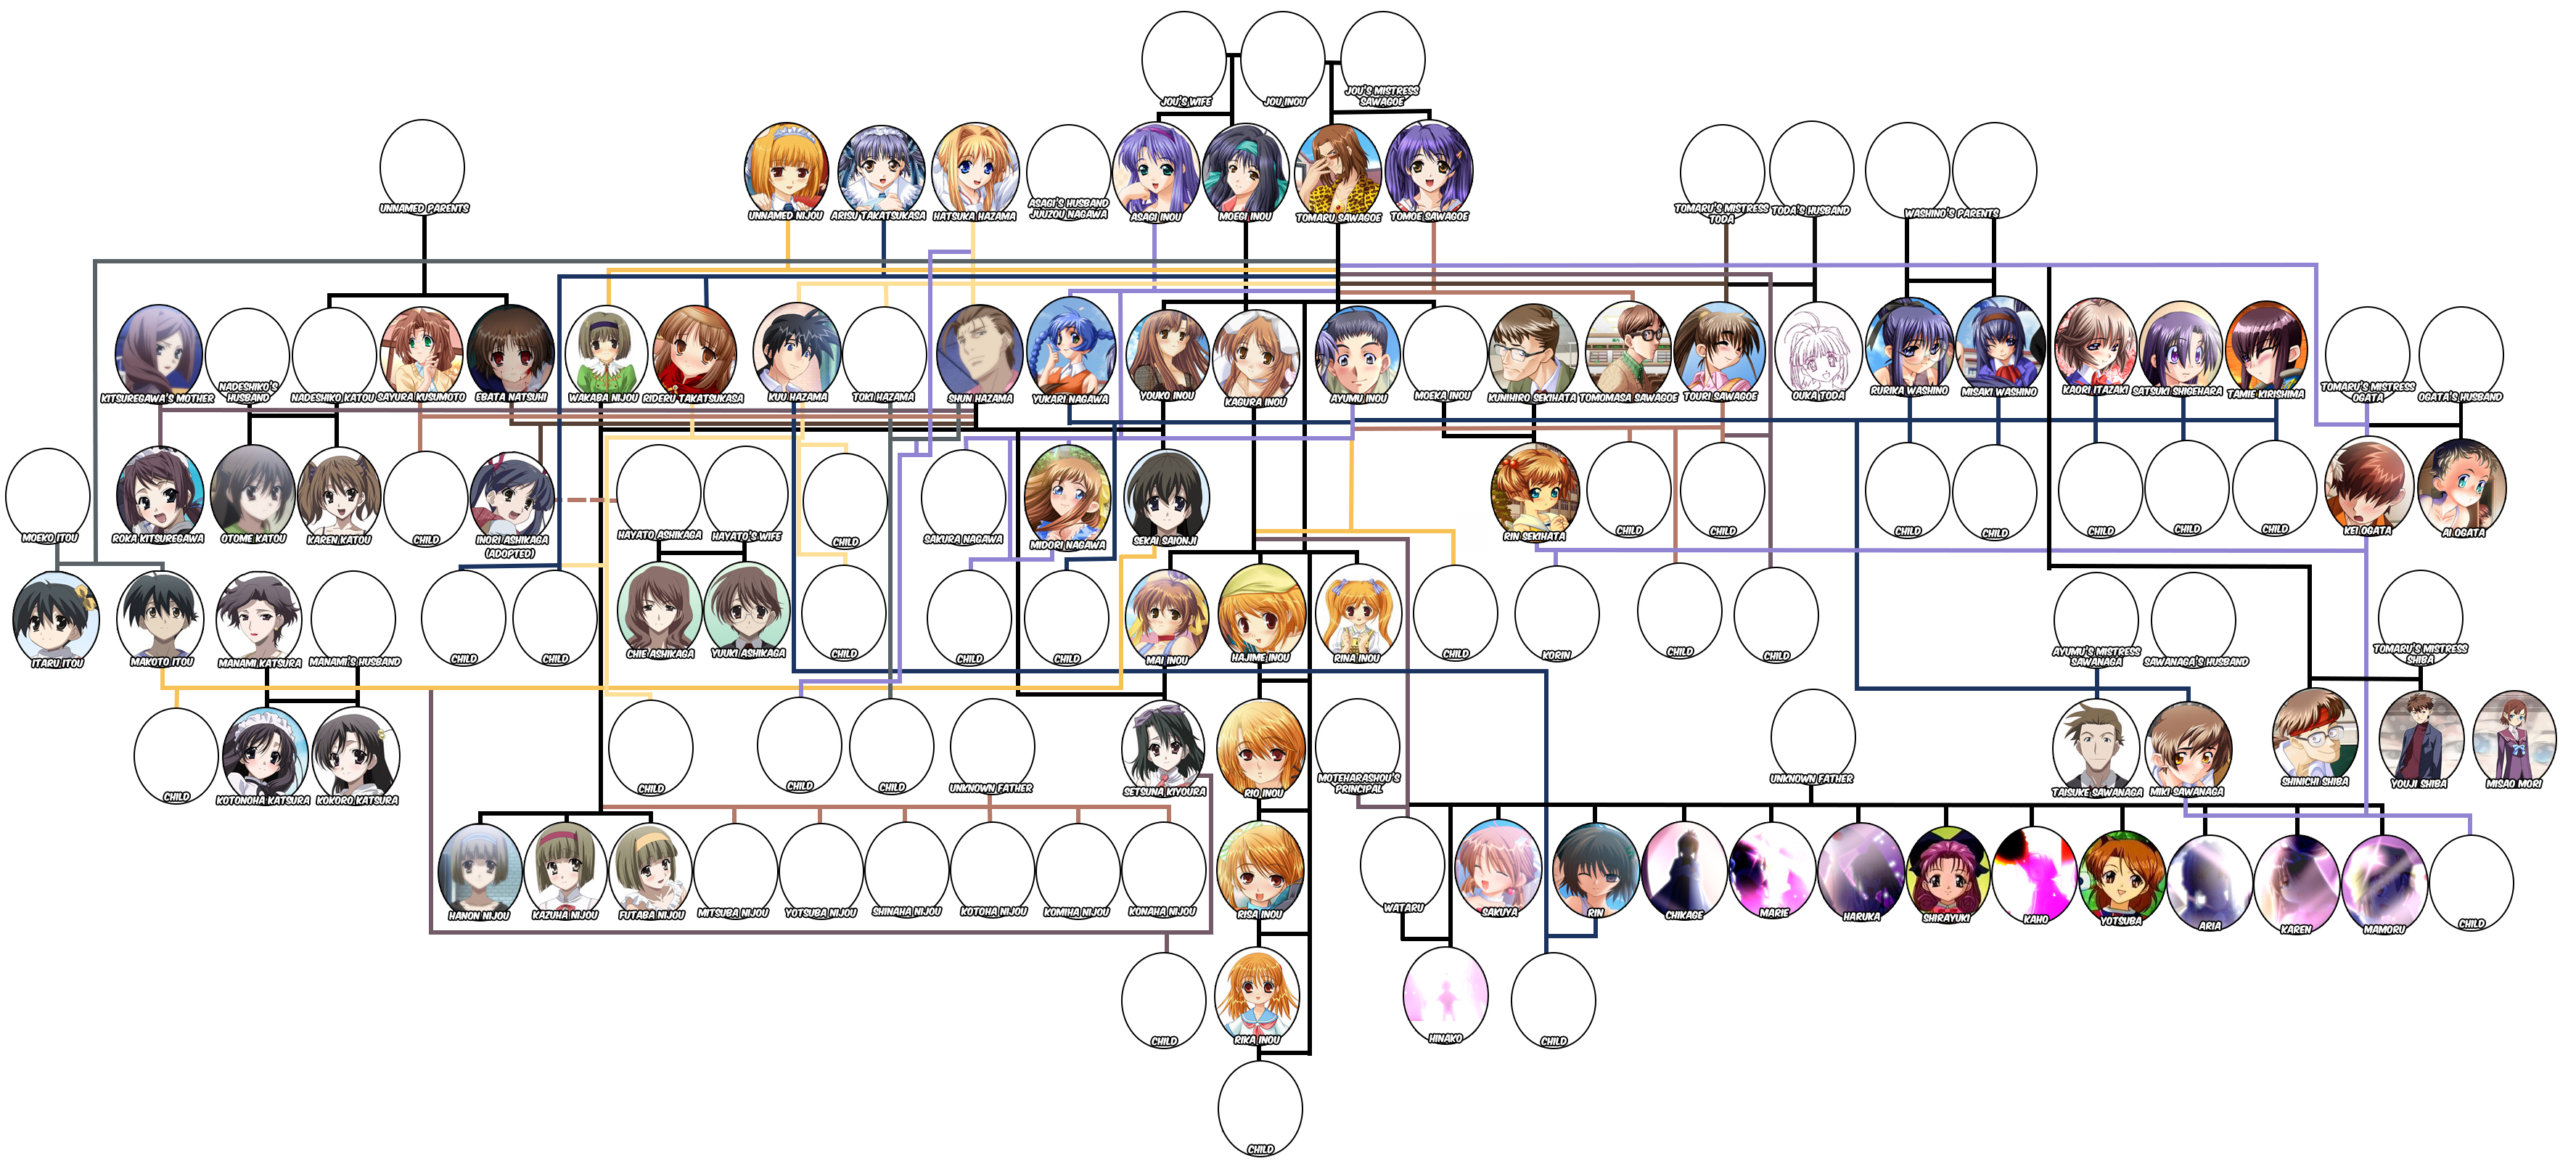 Family Tree - Anime Characters Database Wiki